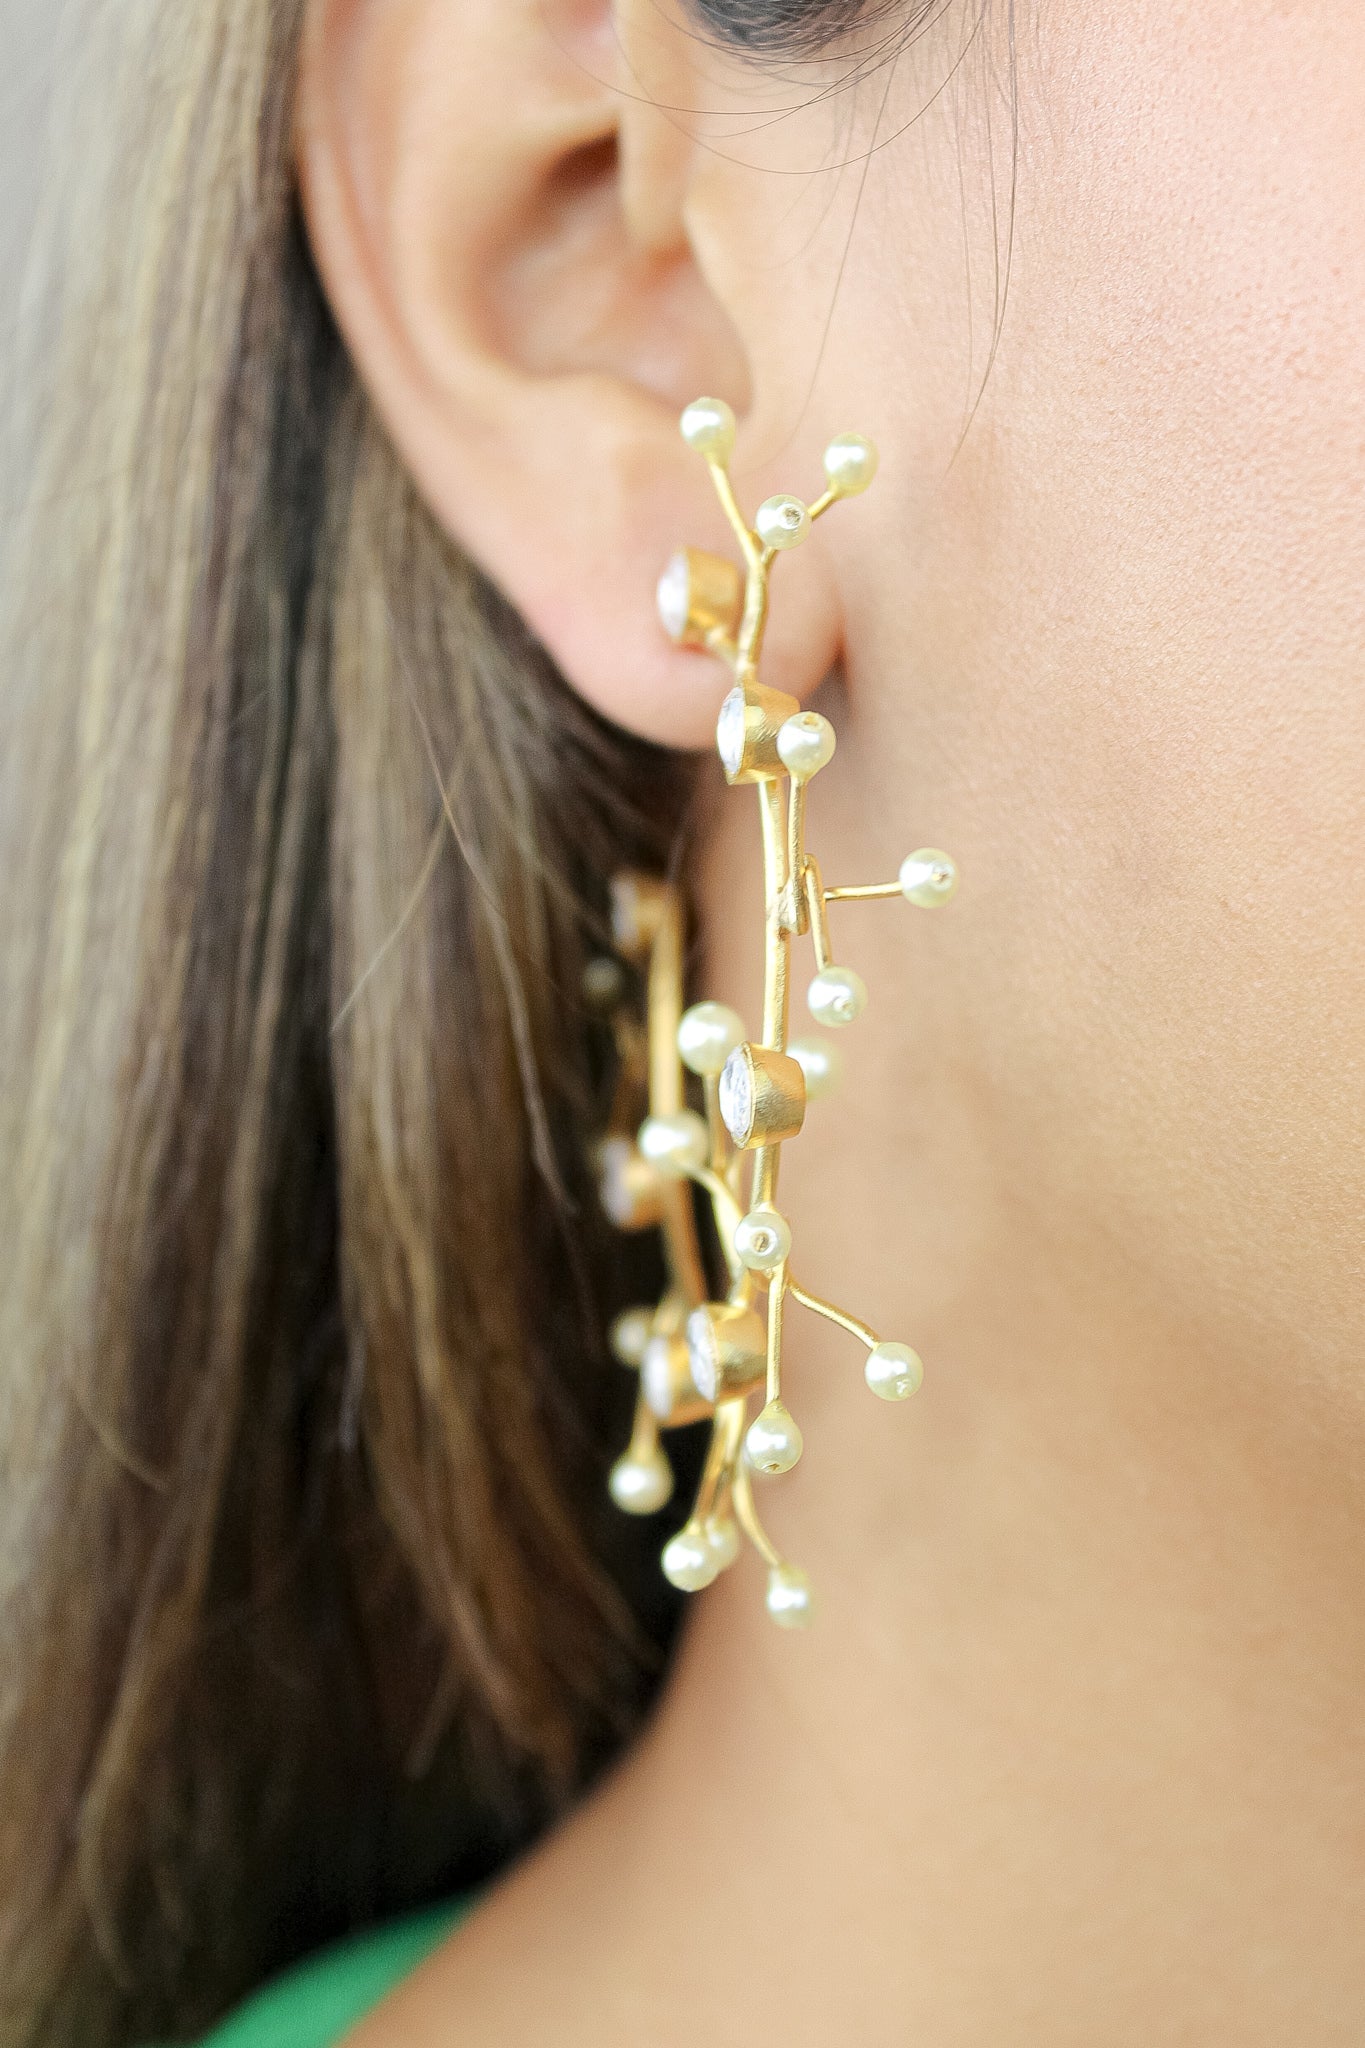 Nature-Inspired Golden Creeper Hoop Earrings - Sustainable 18K Gold-Plated Jewelry for Everyday Look Enhancement - Jewelry & Watches - Bijou Her -  -  - 